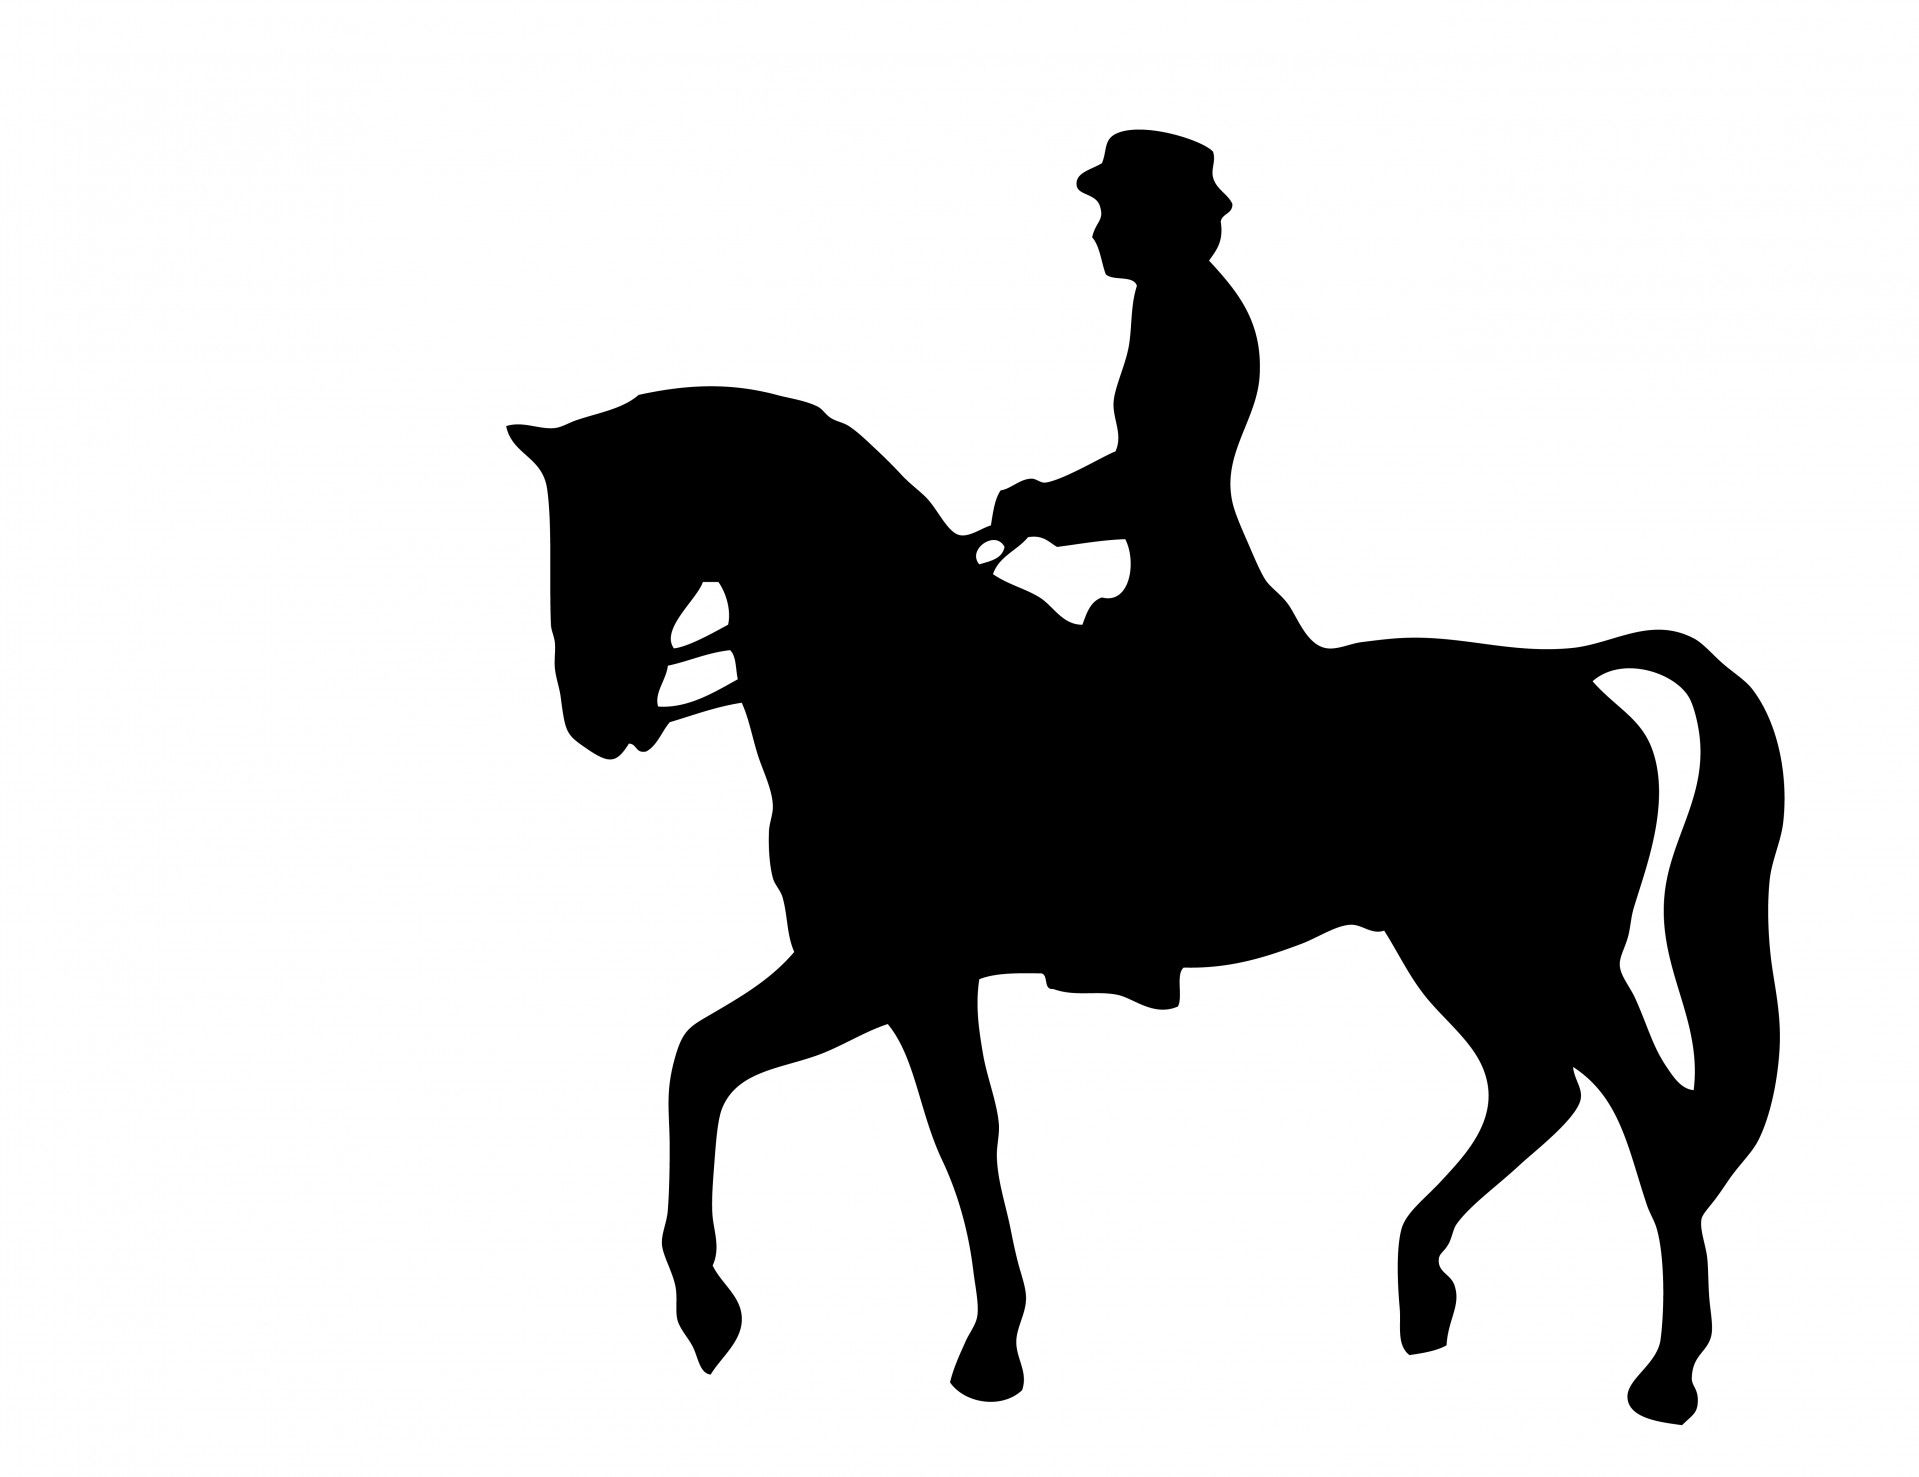 Horse riding silhouette.